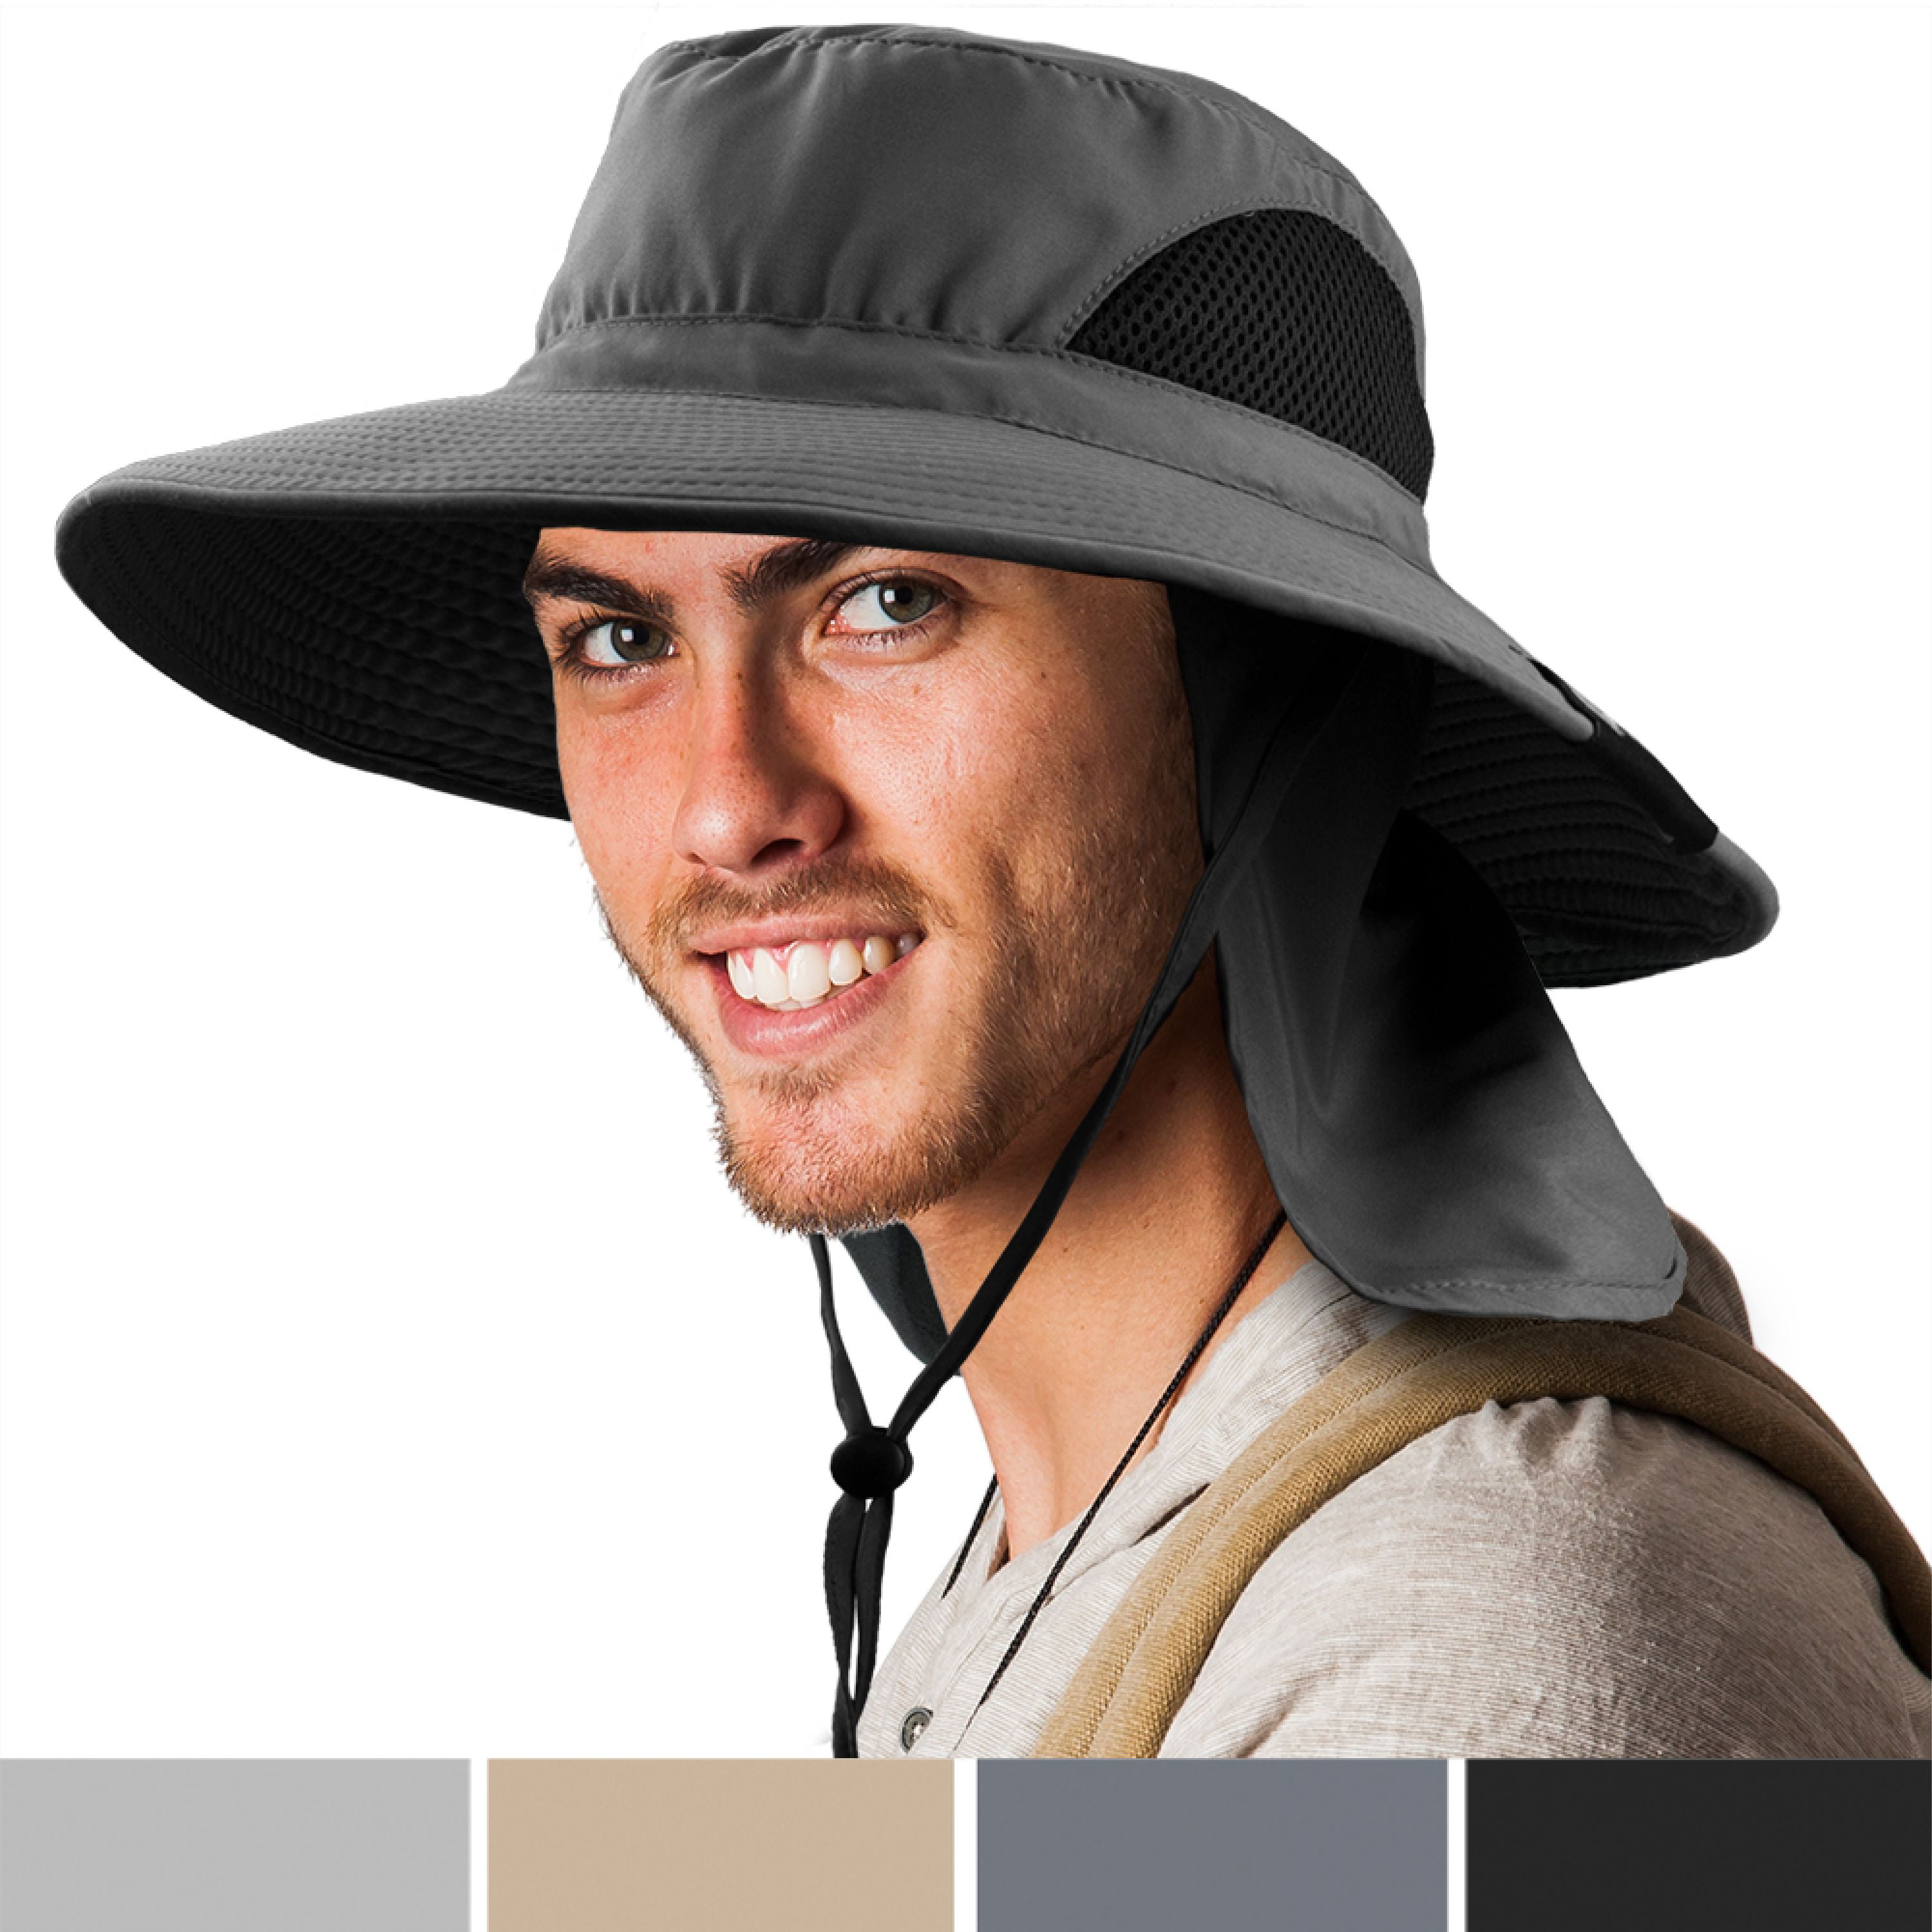 SUN CUBE Fishing Hat for Men, Women with Neck Flap